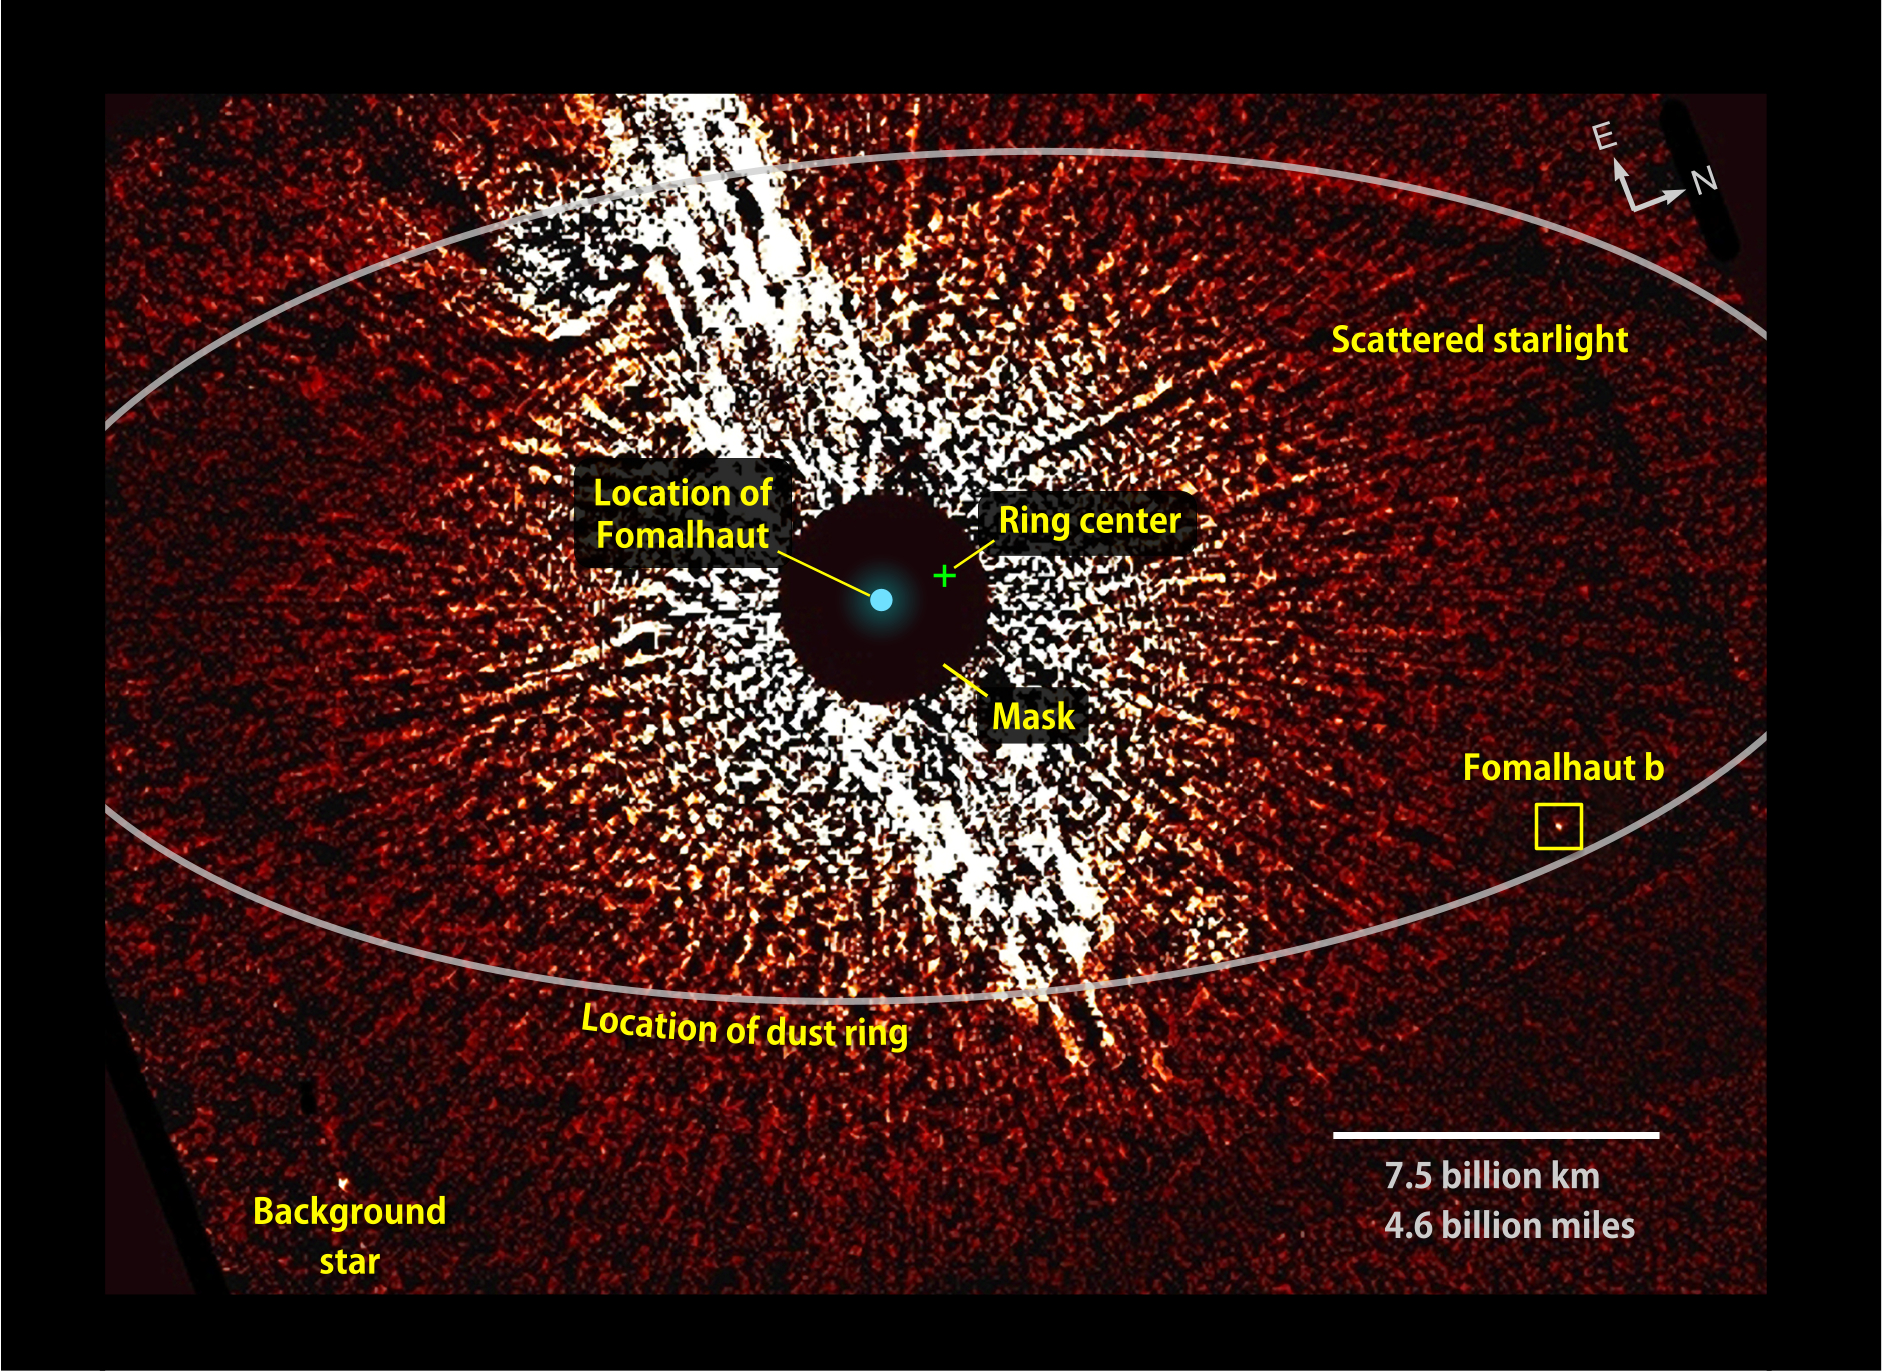 This visible-light image from the Hubble Space Telescope shows the vicinity of the star Fomalhaut, including the location of its dust ring and disputed planet, Fomalhaut b. A coronagraphic mask helped dim the star's brightness. This view combines two 2006 observations that were taken with masks of different sizes (1.8 and 3 arcseconds). Labels.Credit: NASA/ESA/T. Currie (U. Toronto)